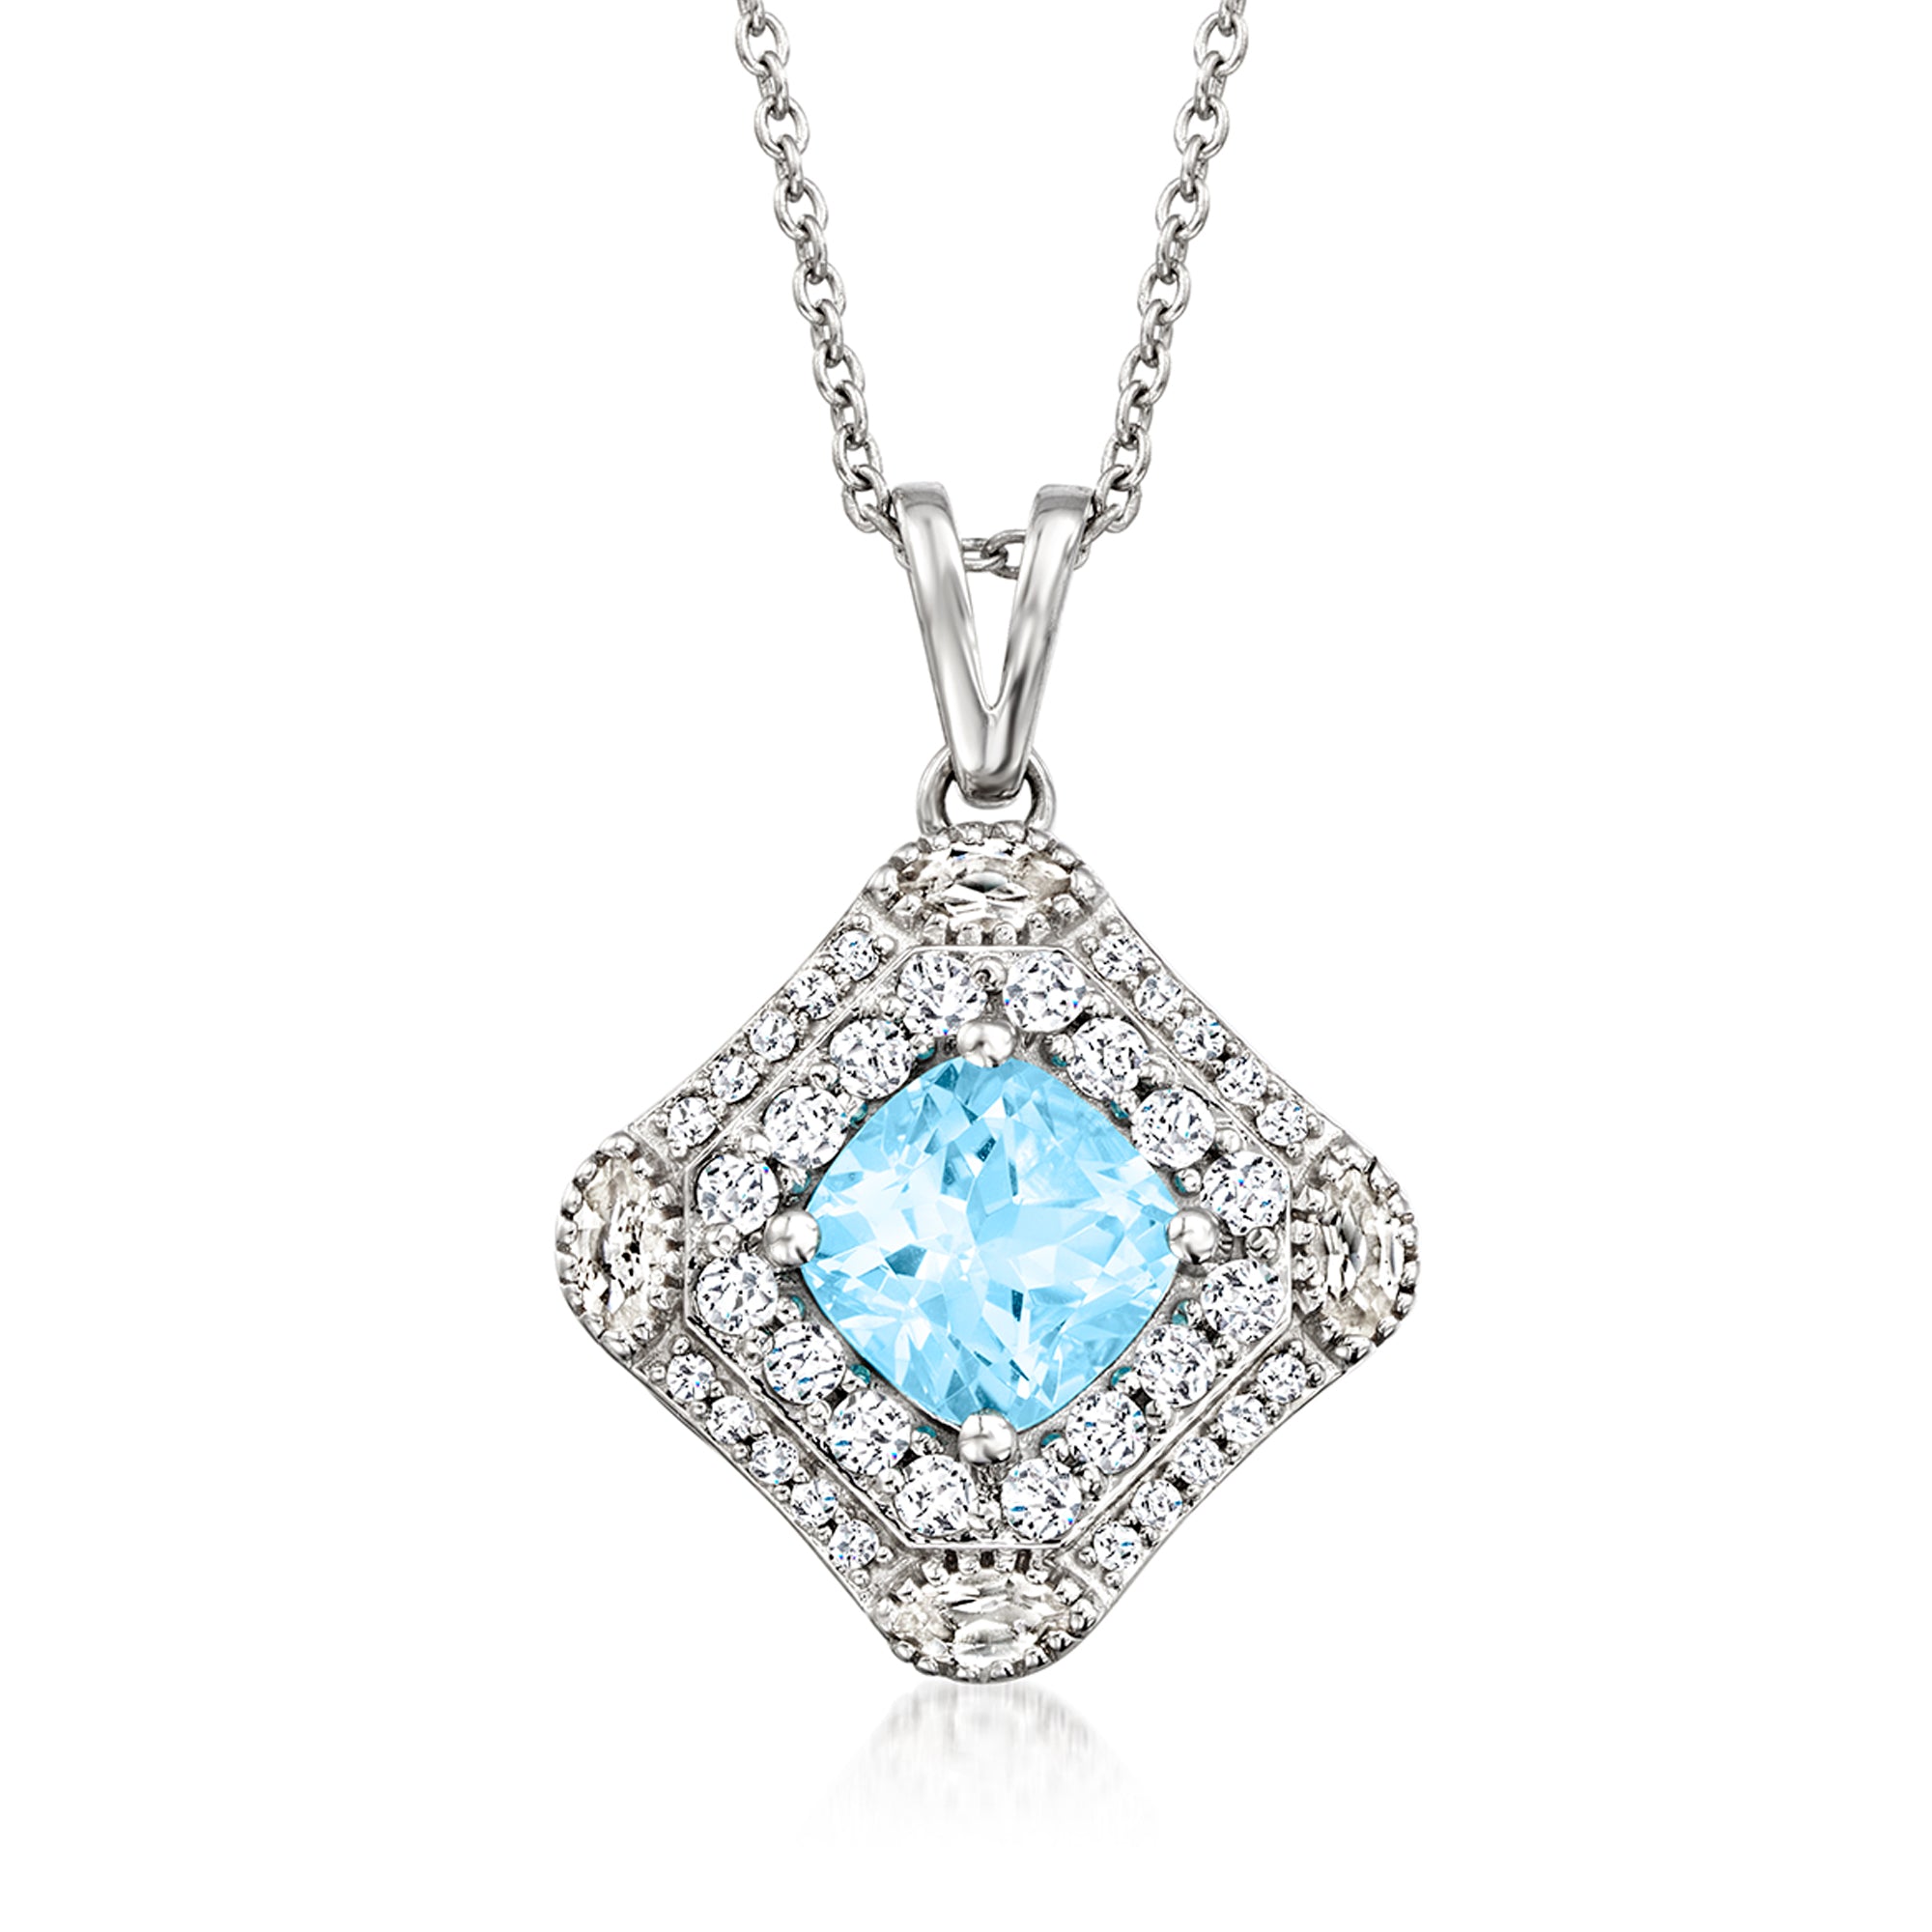 Ross-simons Sky Blue And . White Topaz Pendant Necklace In Sterling Silver